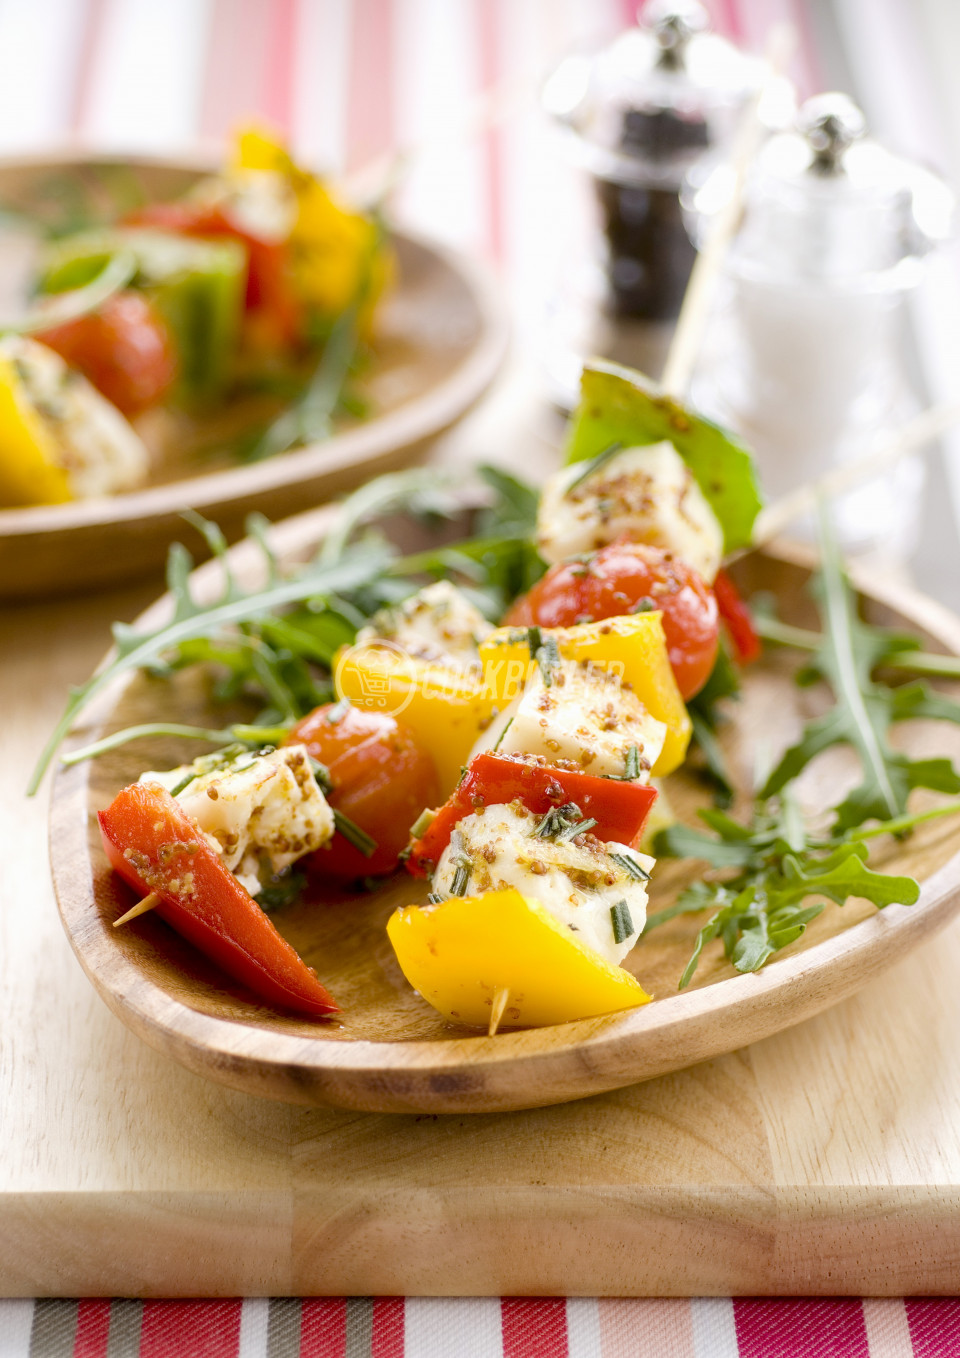 Halloumi skewers with red and yellow peppers | preview